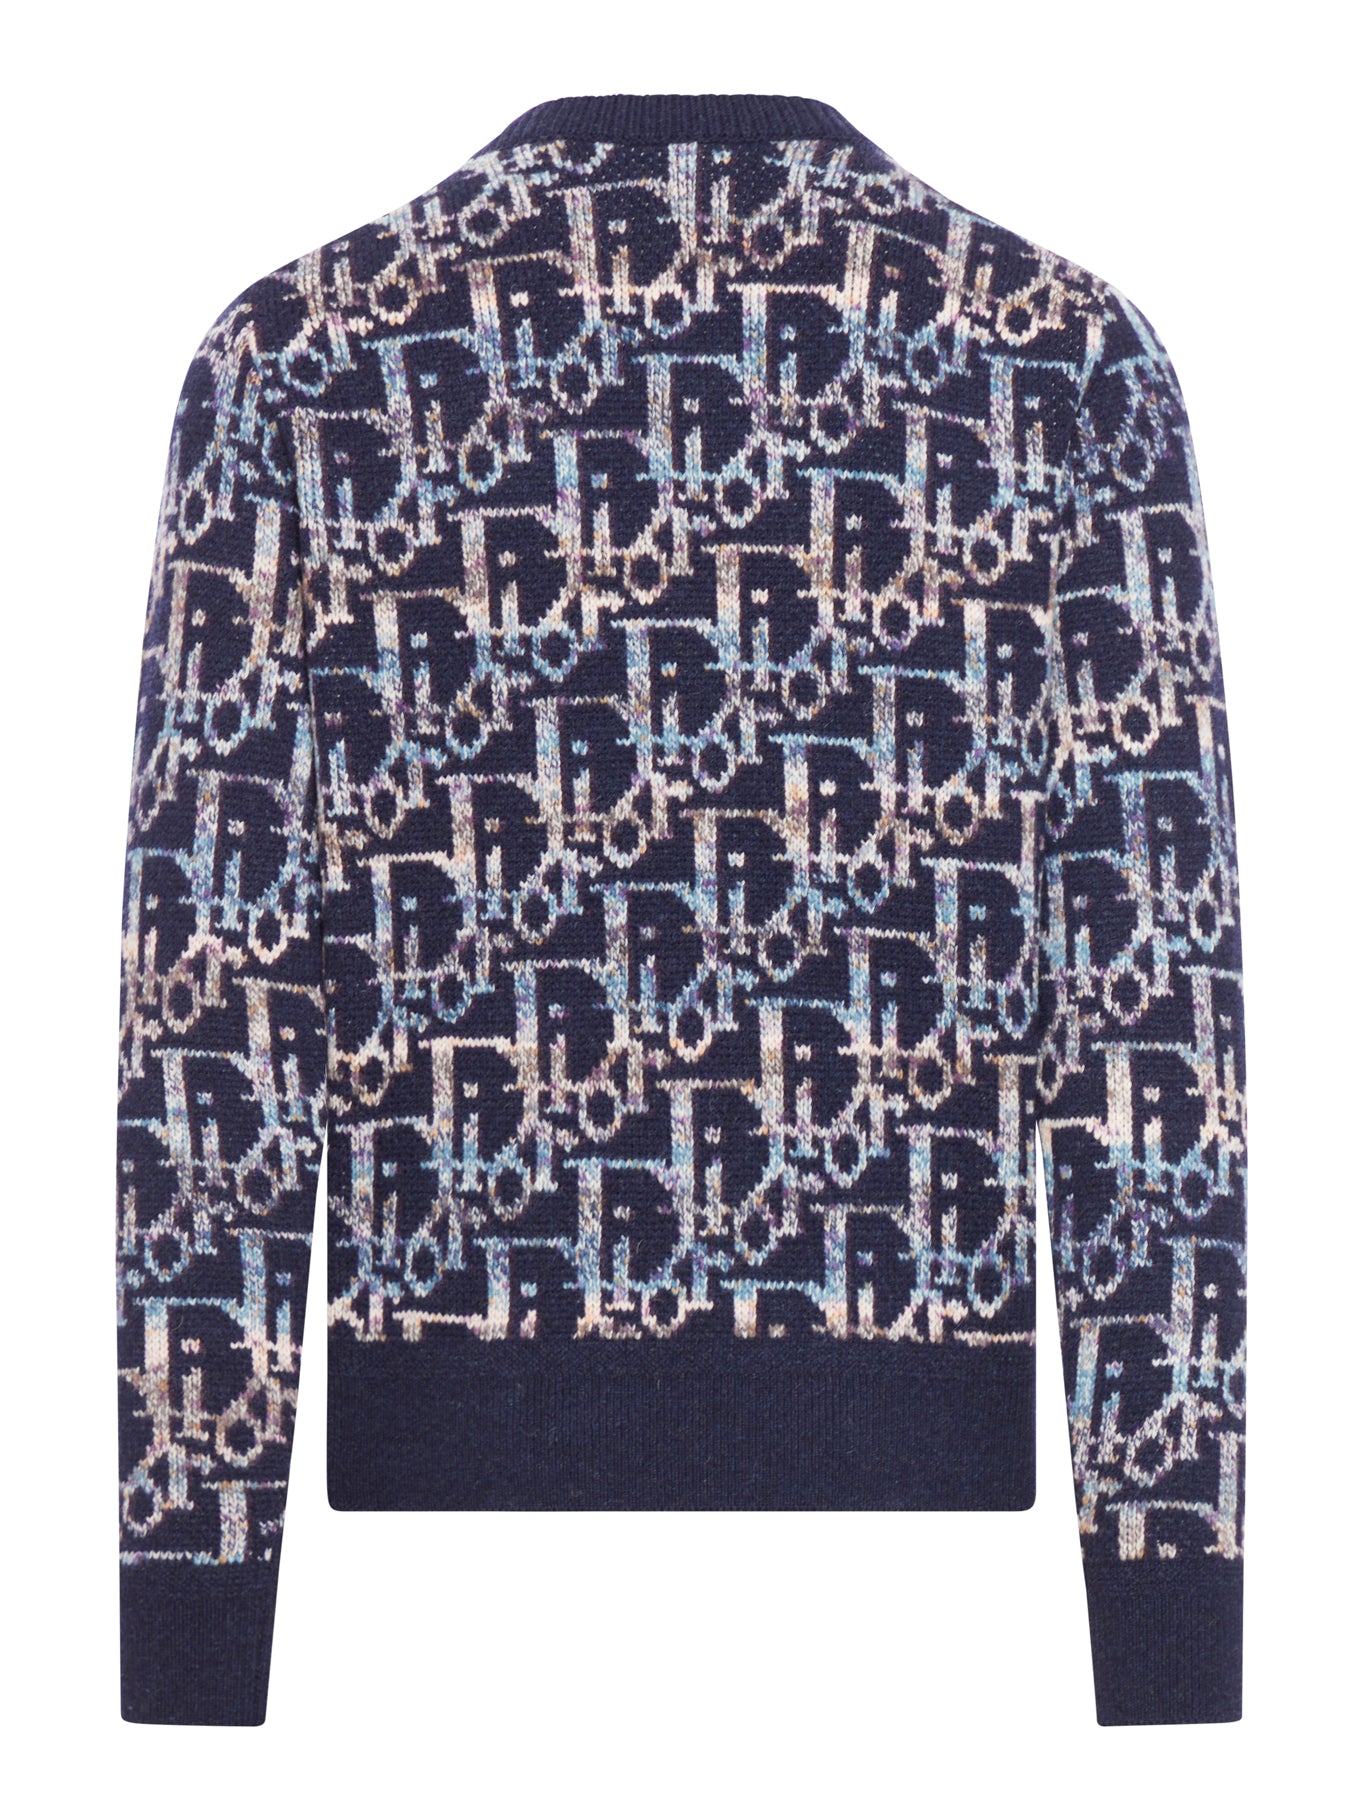 DIOR OBLIQUE SWEATER in wool Jacquard